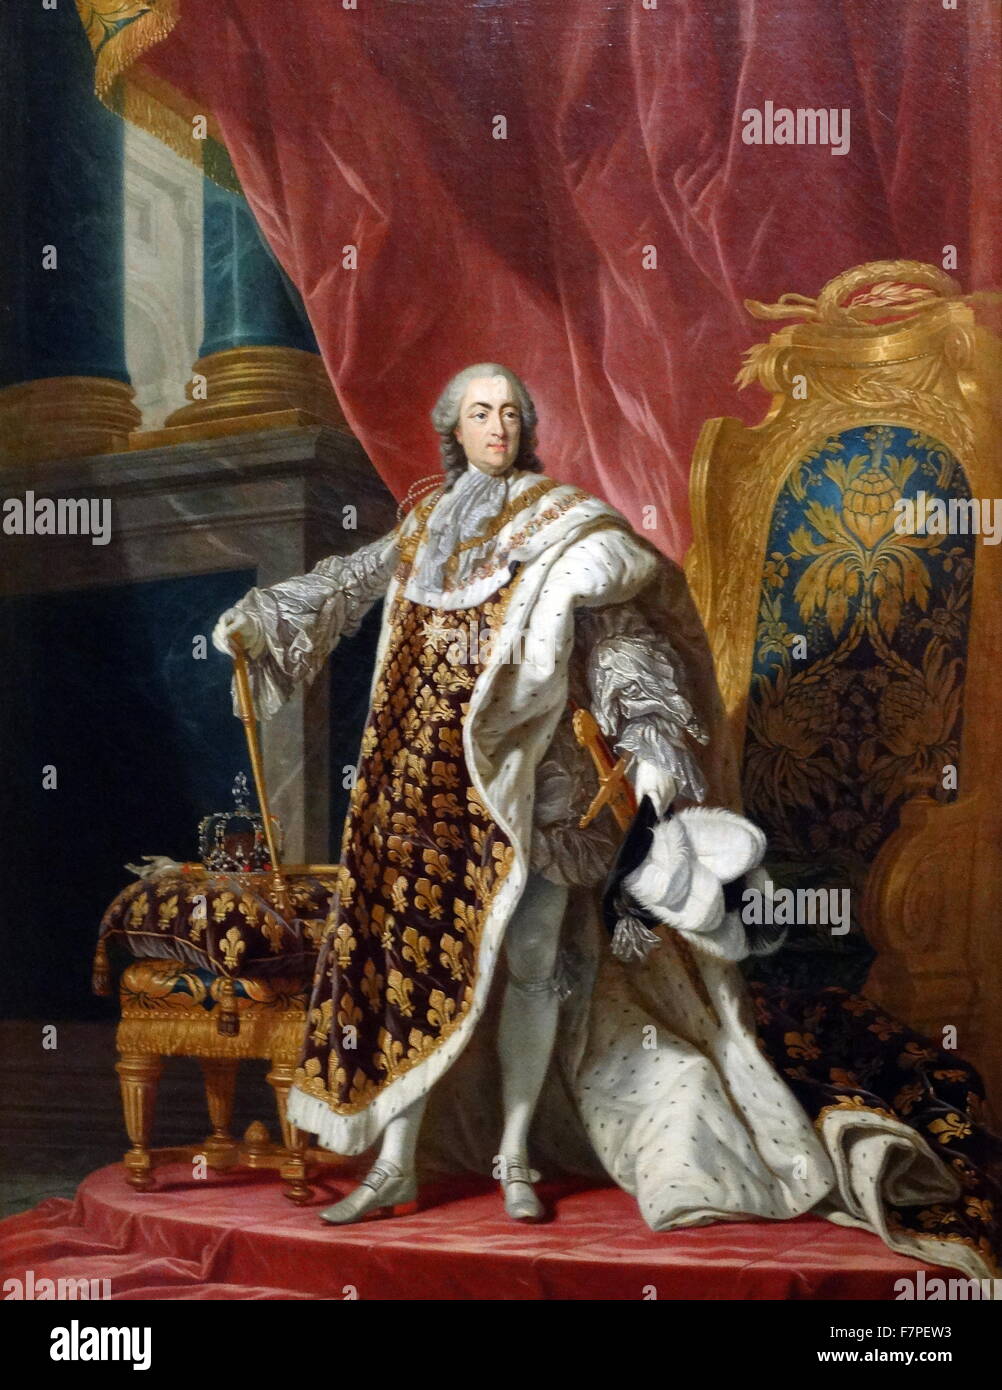 Portrait of King Louis XV of France (1710-1774) by the Studio of Louis-Michel van Loo (1707-1771) French painter. Dated 18th Century Stock Photo